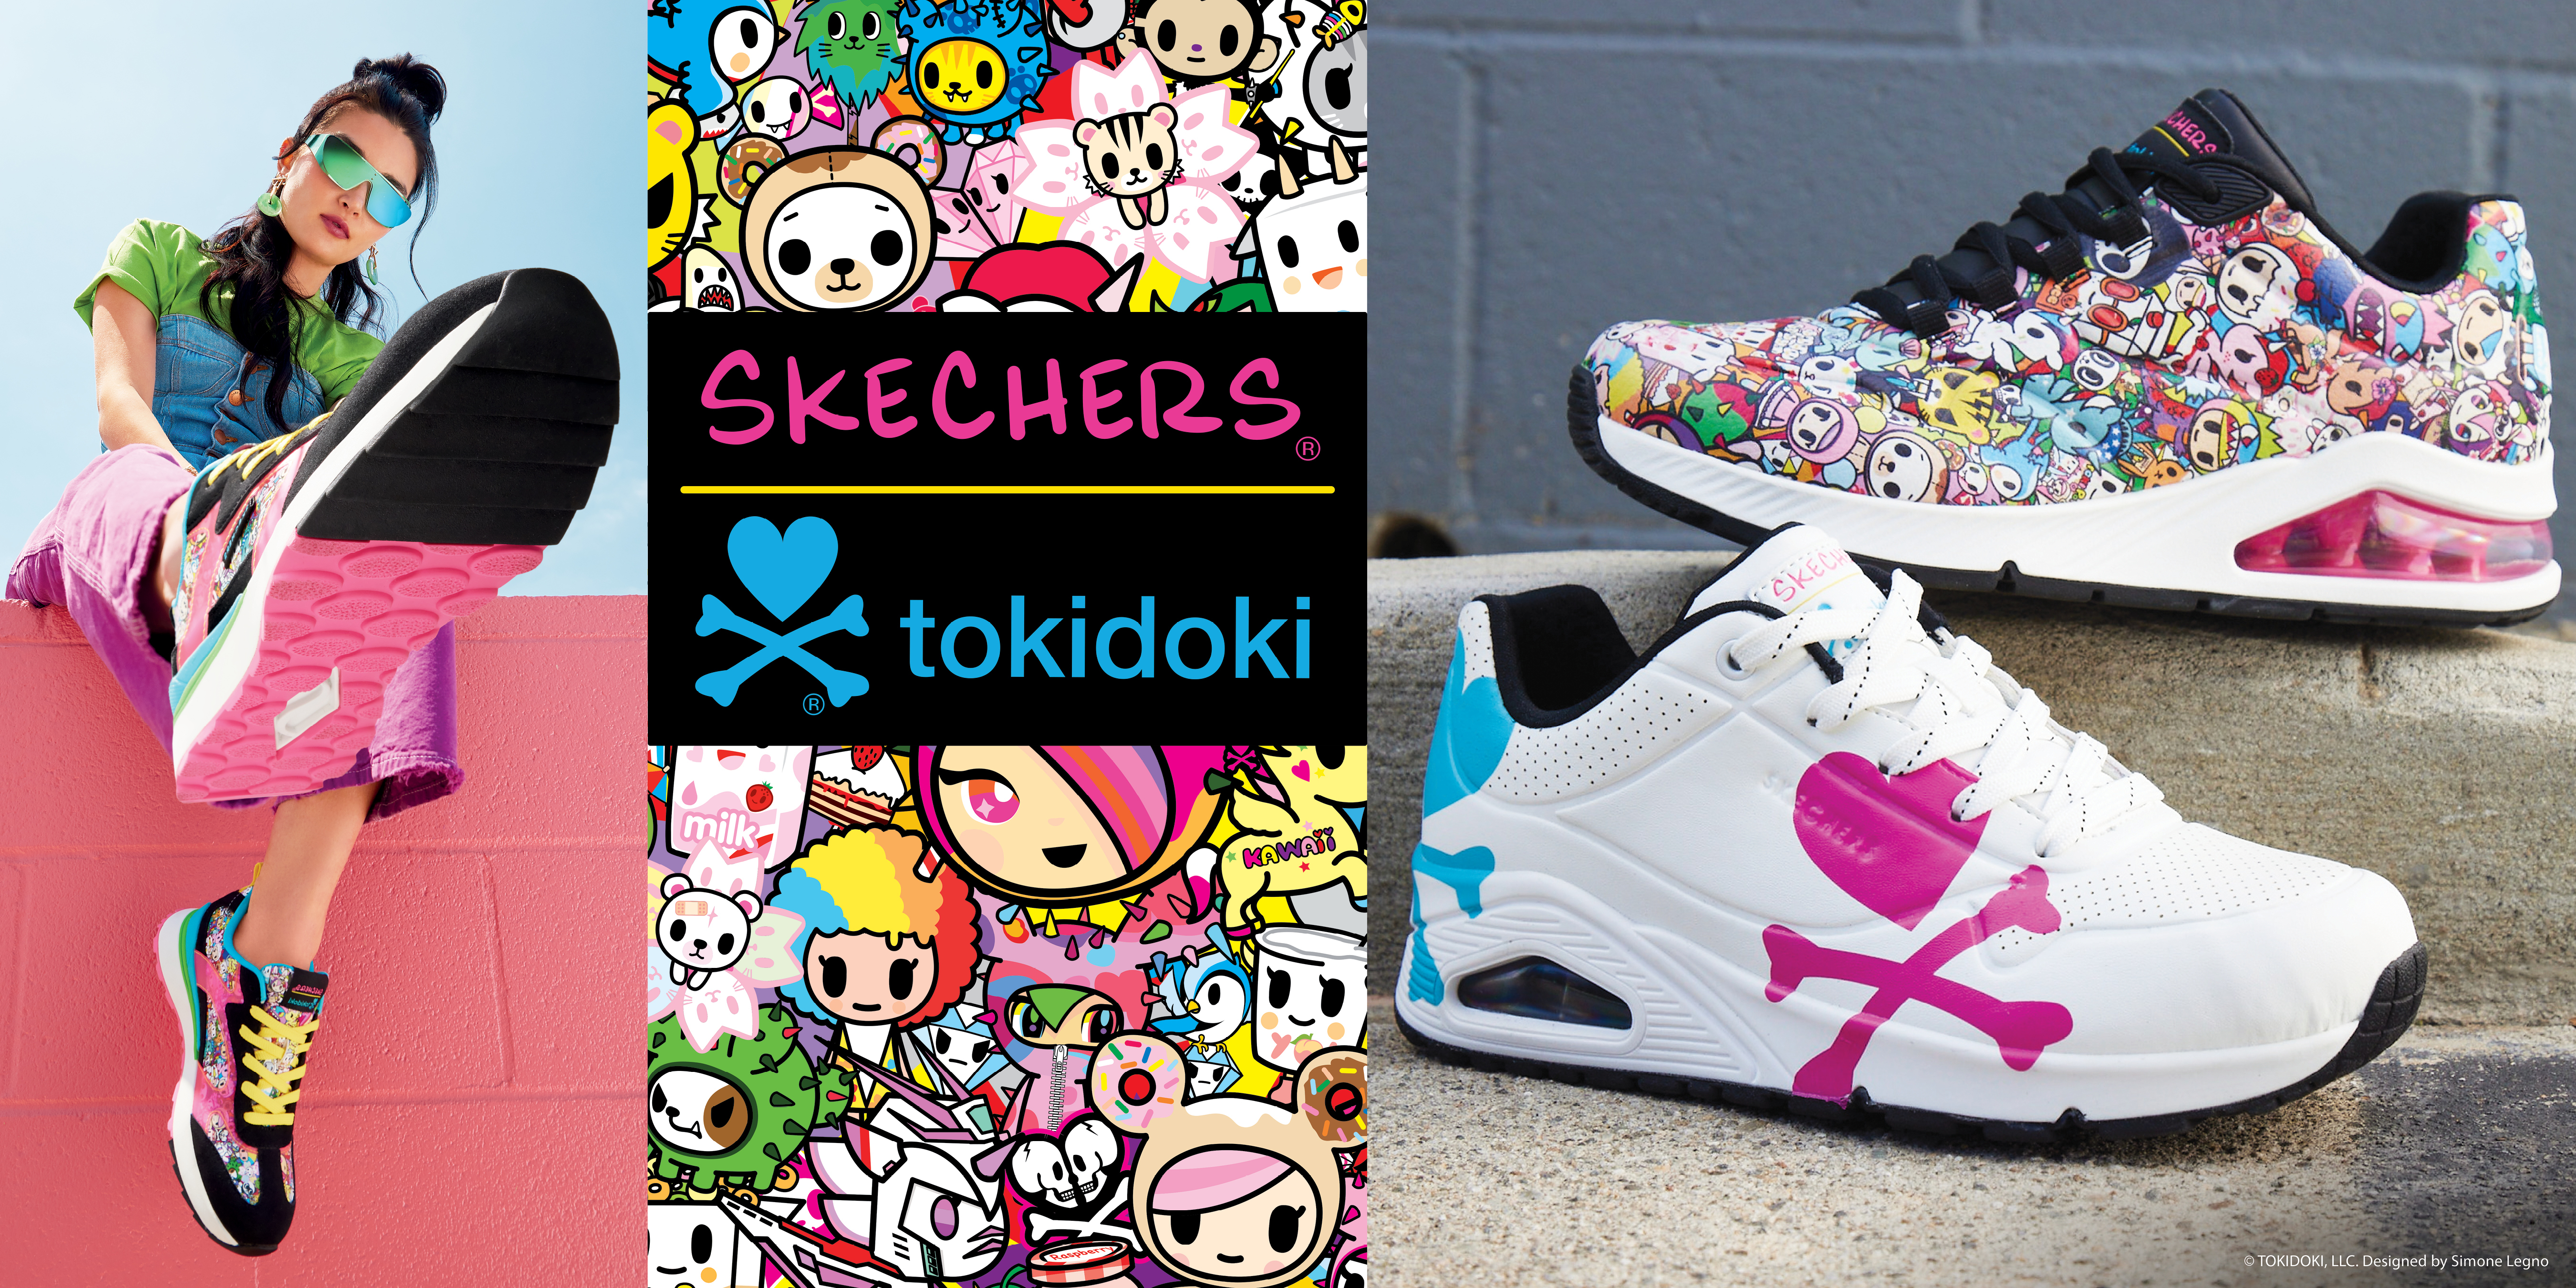 Skechers Collaborates With tokidoki on Limited-Edition Business